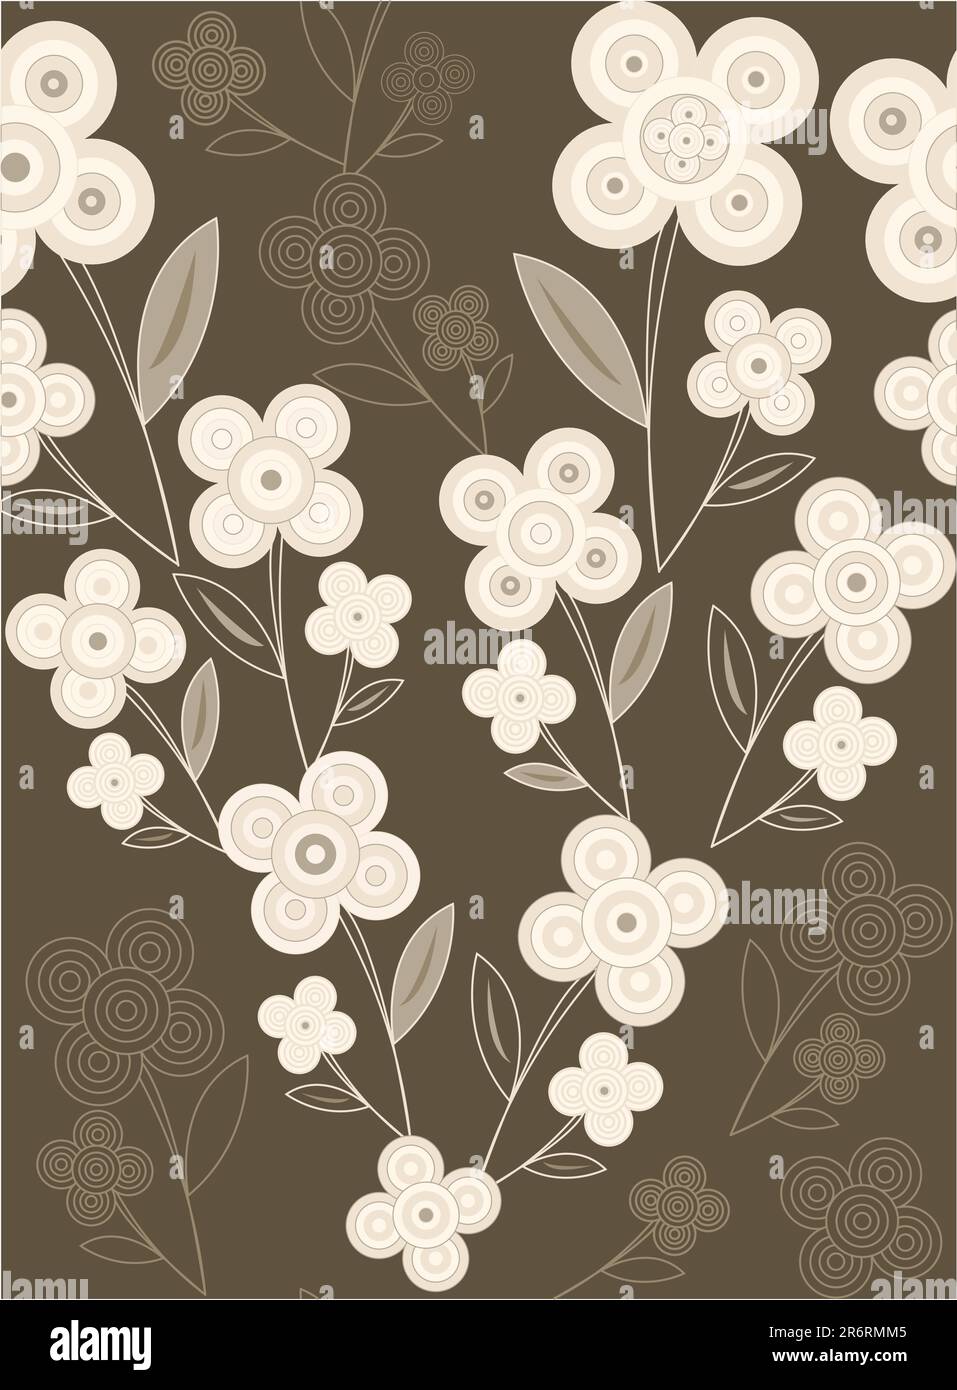 closeup floral pattern in color brown and beige Stock Vector